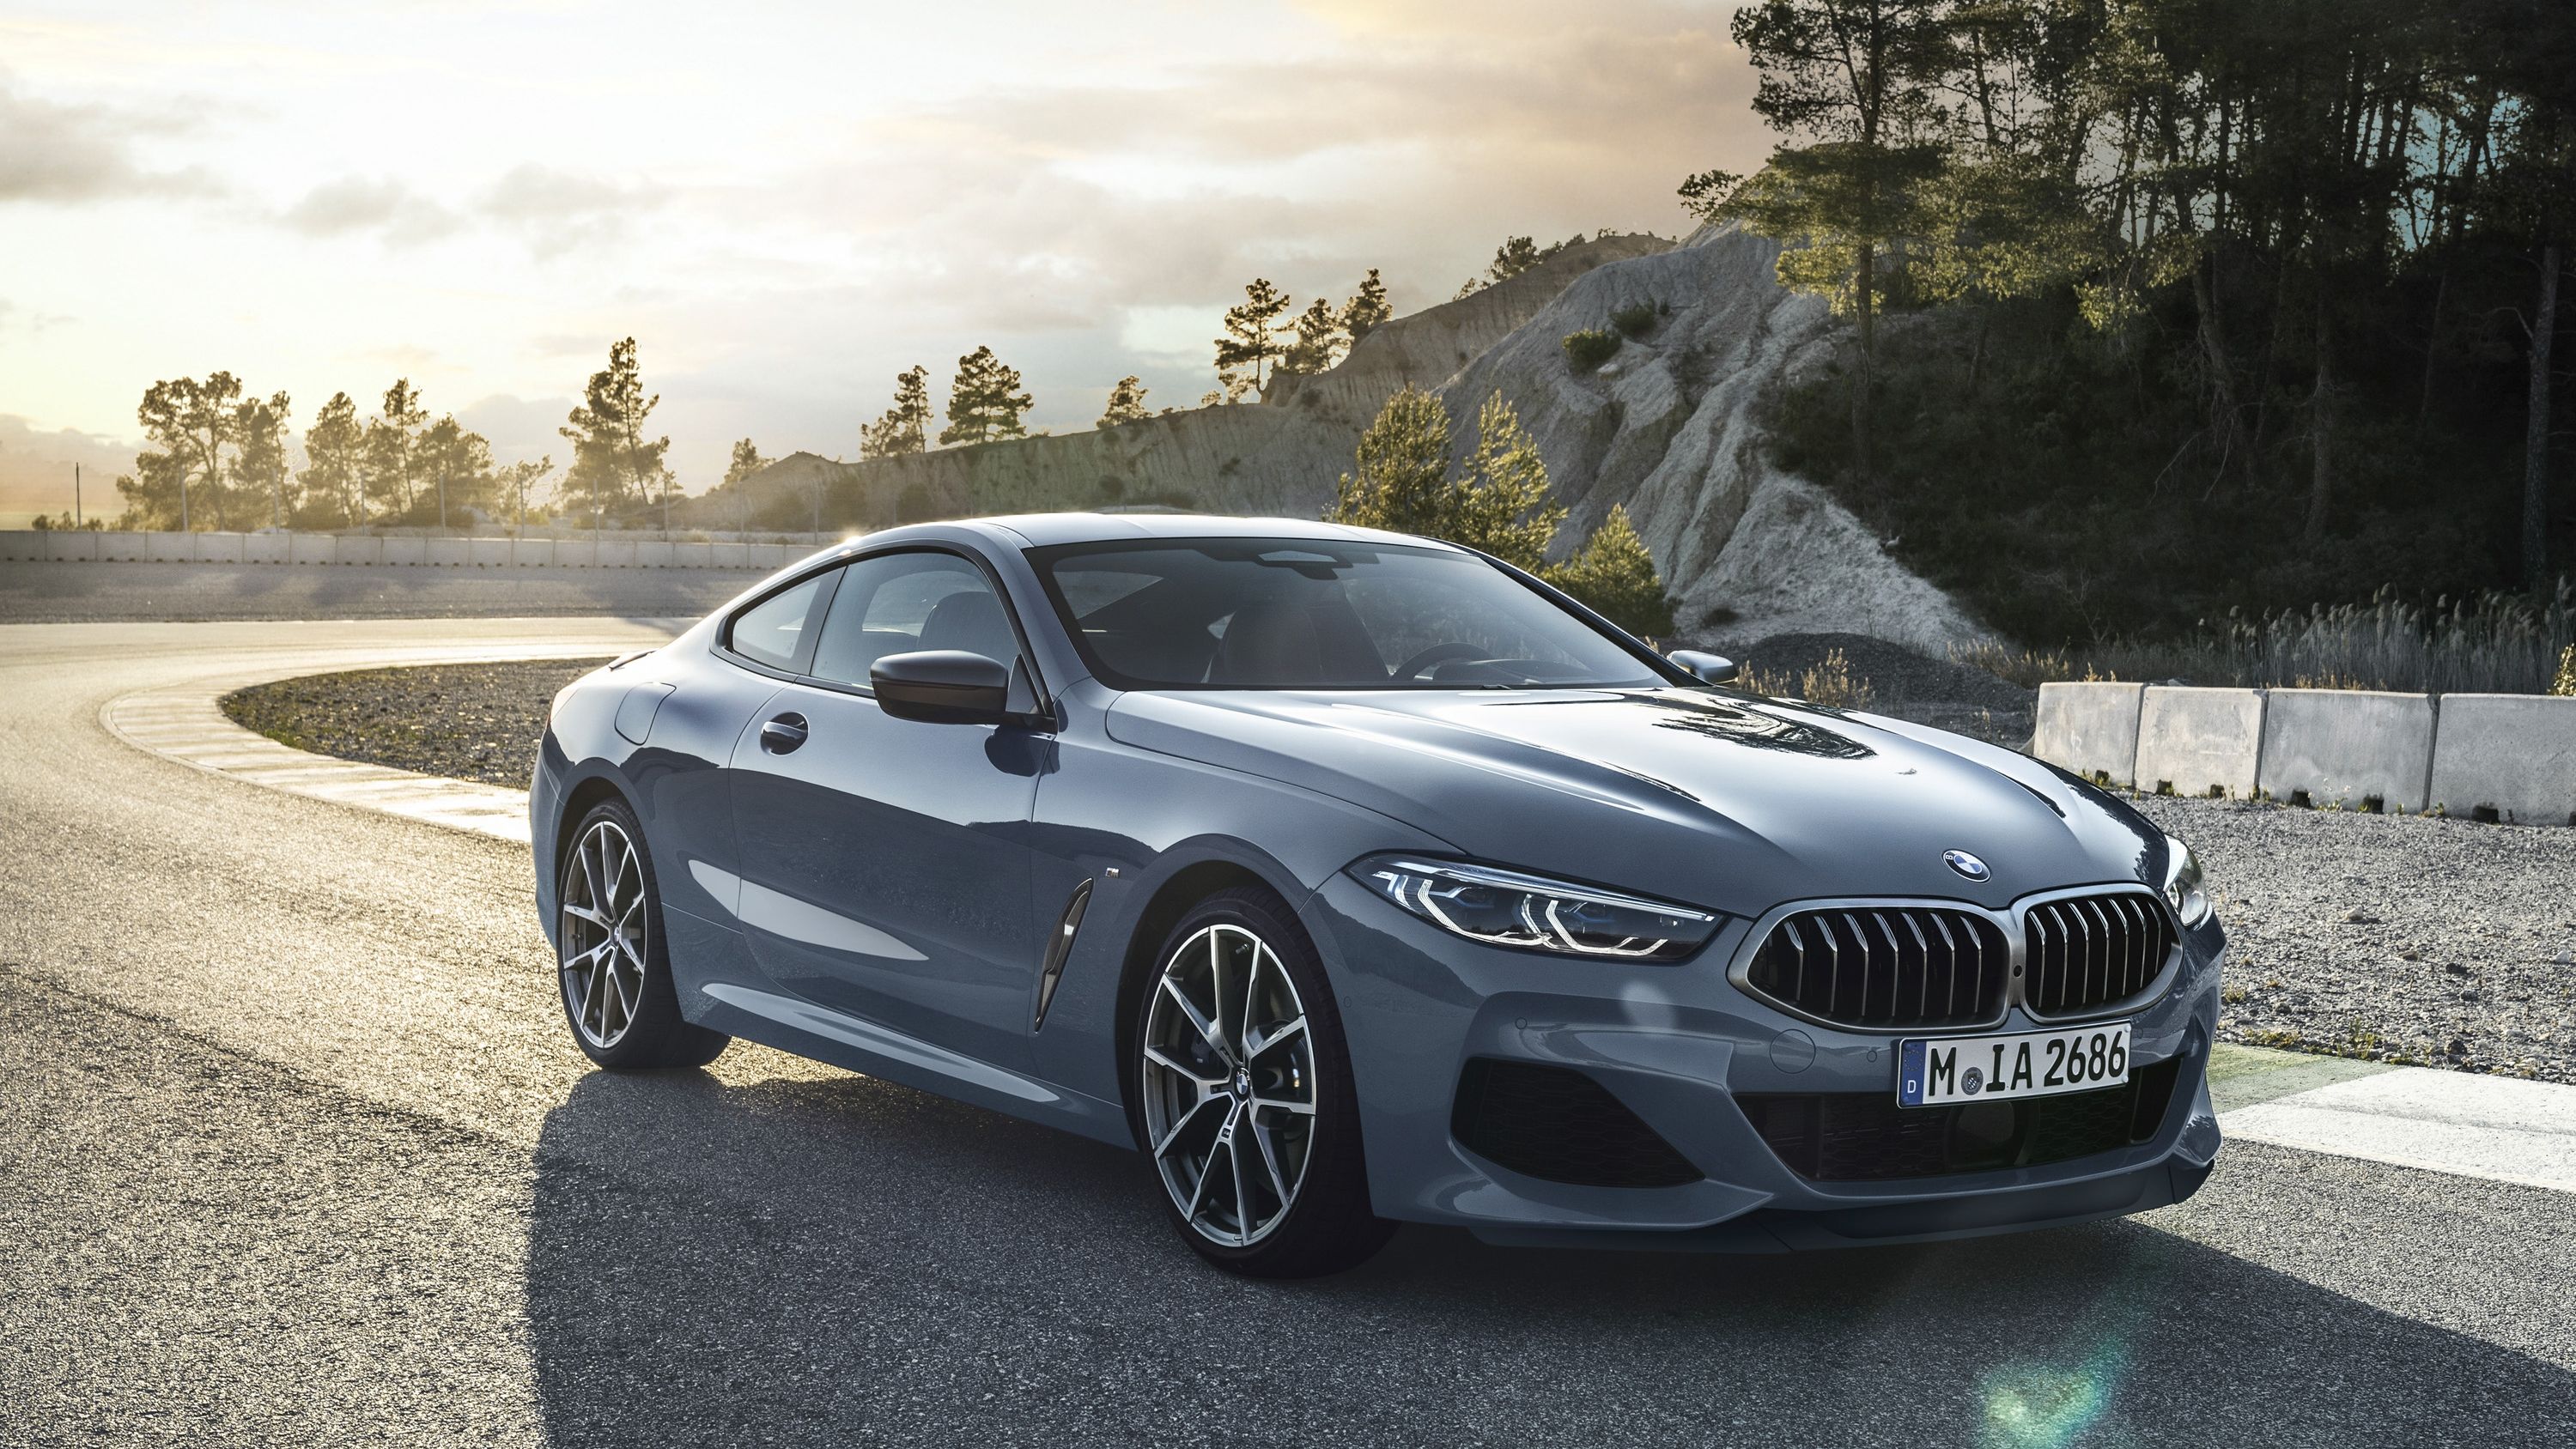 2020 Is COVID-19 Hitting Luxury Car Sales? More than 2,000 brand-new BMW 8 Series models Siting on U.S. lots